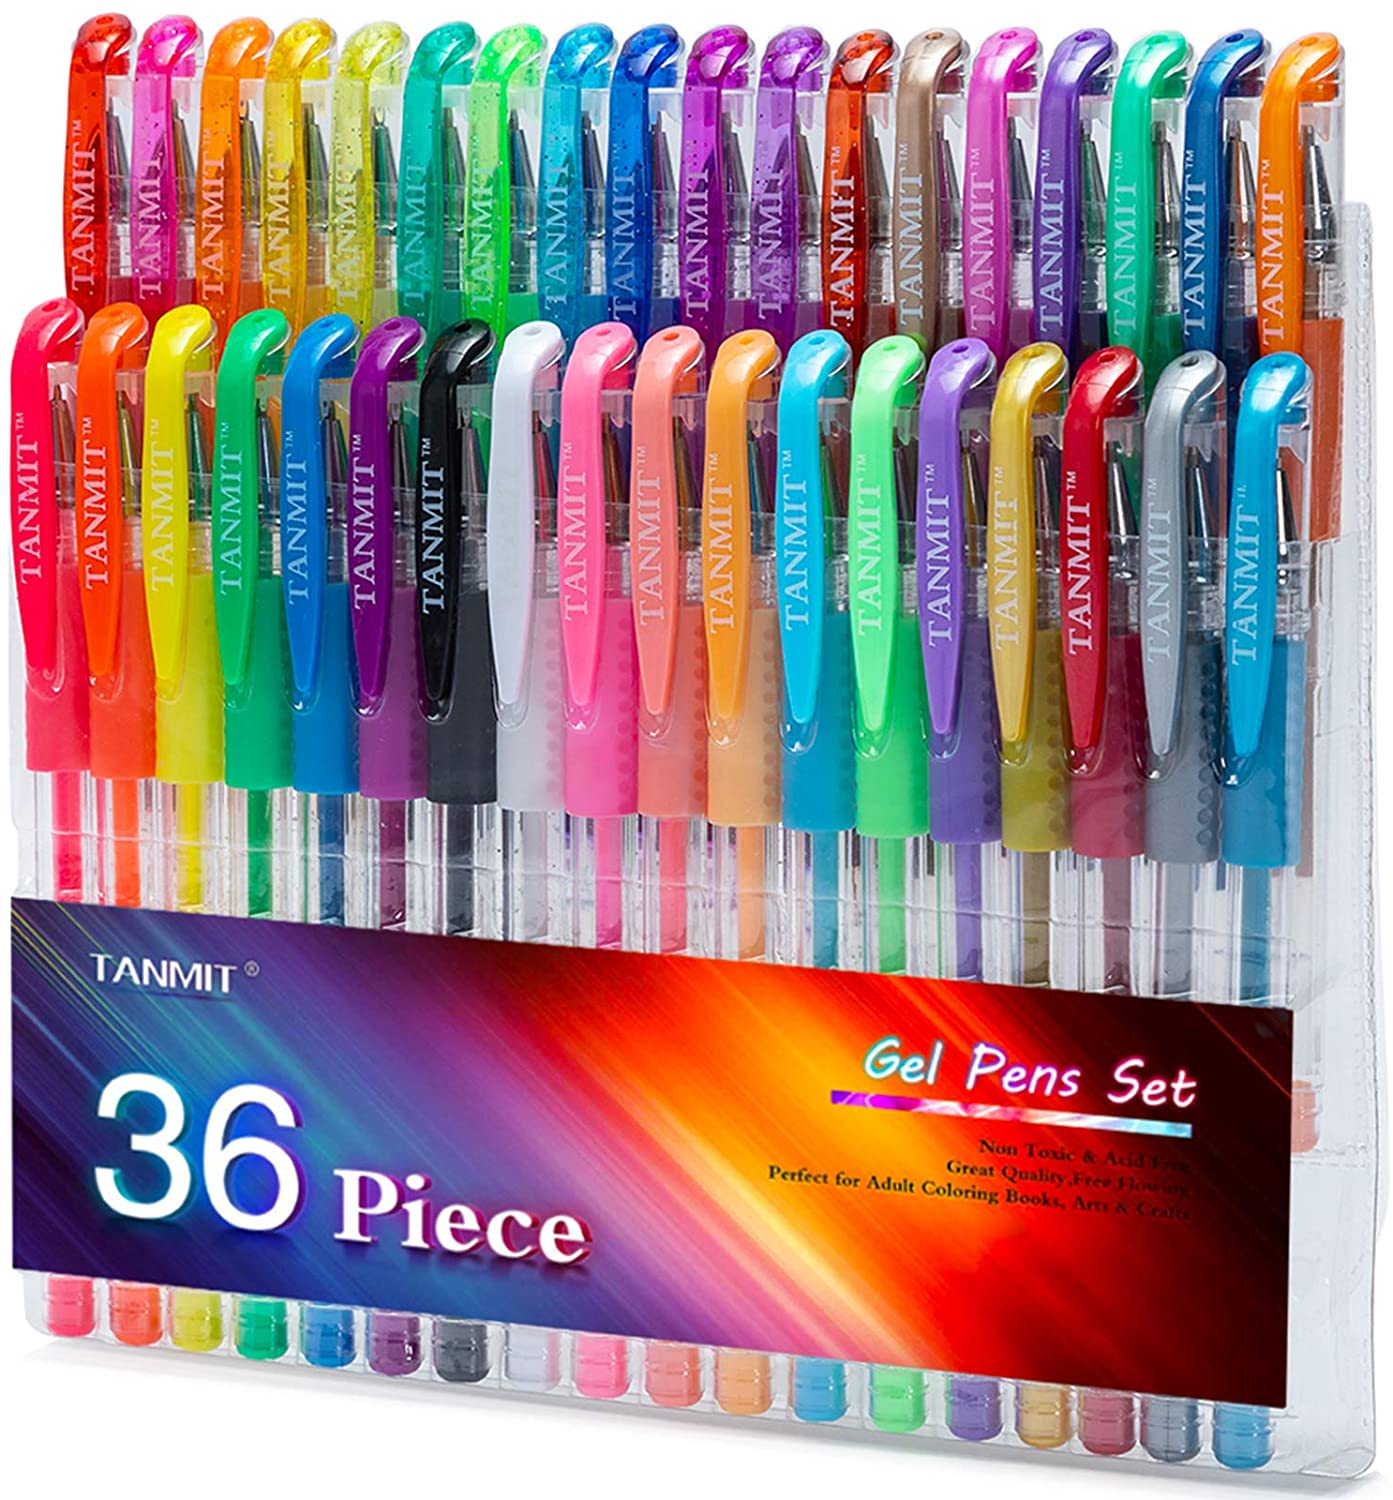  Tanmit 100 Coloring Gel Pens Set for Adults Coloring Books-  Gel Colored Pen for Drawing, Writing & Unique Colors Including Glitter,  Neon, Standard, Symhony, Milky & Metallic : Arts, Crafts